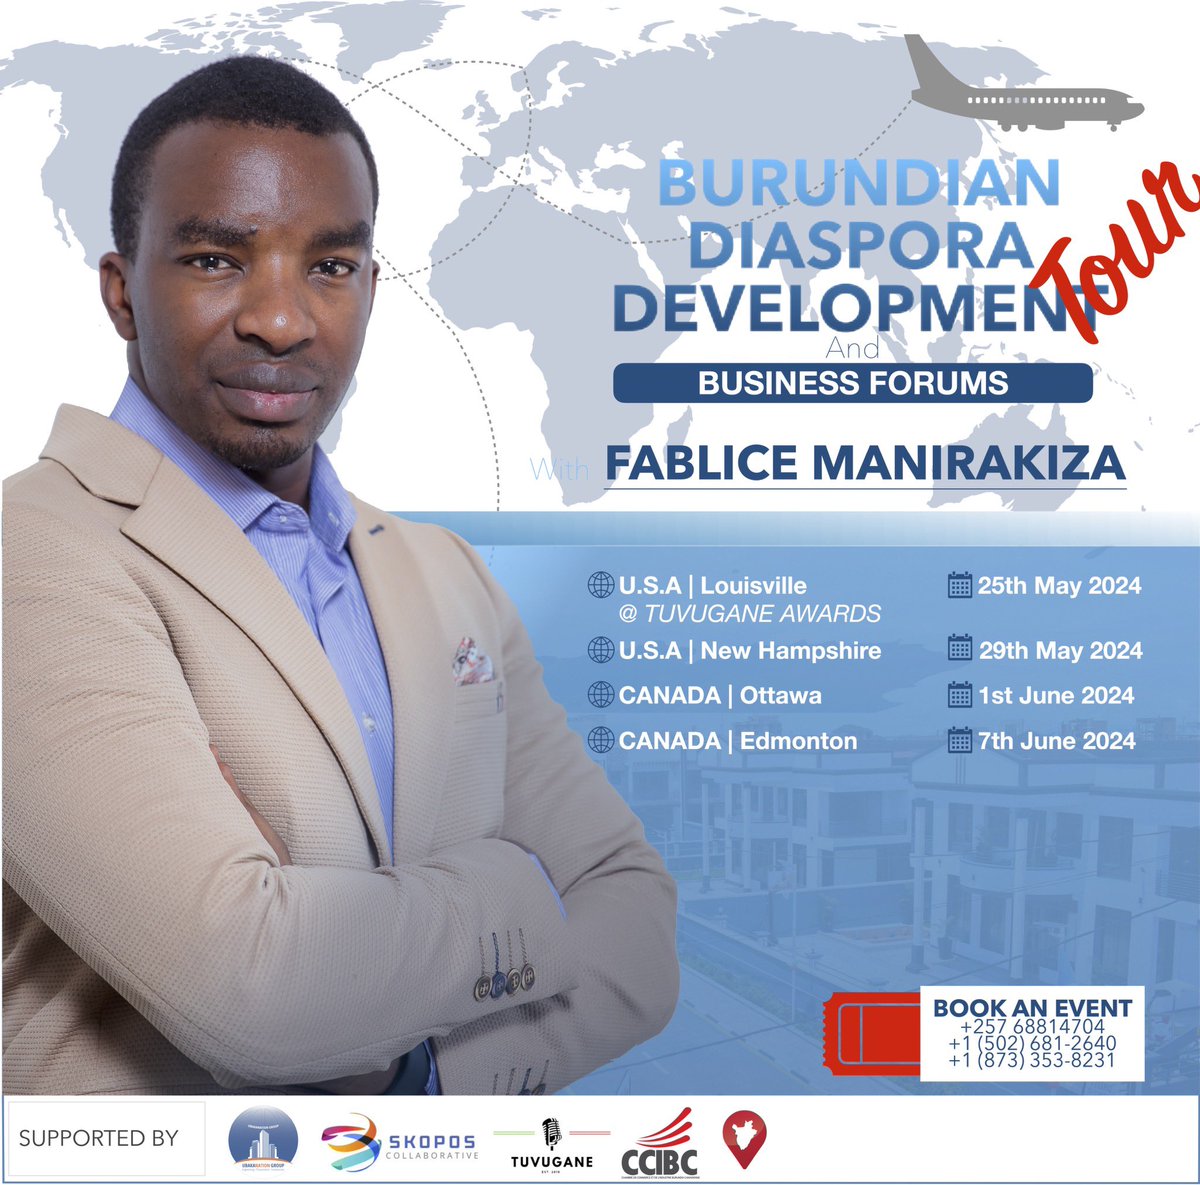 CONFIRMED 🇺🇸🇨🇦 My USA & Canada tour for #BurundianDiaspora development & #businessforums will be a good opportunity of sharing ideas & interactive activities of self-development & investing in Burundi. If you’re interested to host an event in your city, contact us +25768814704